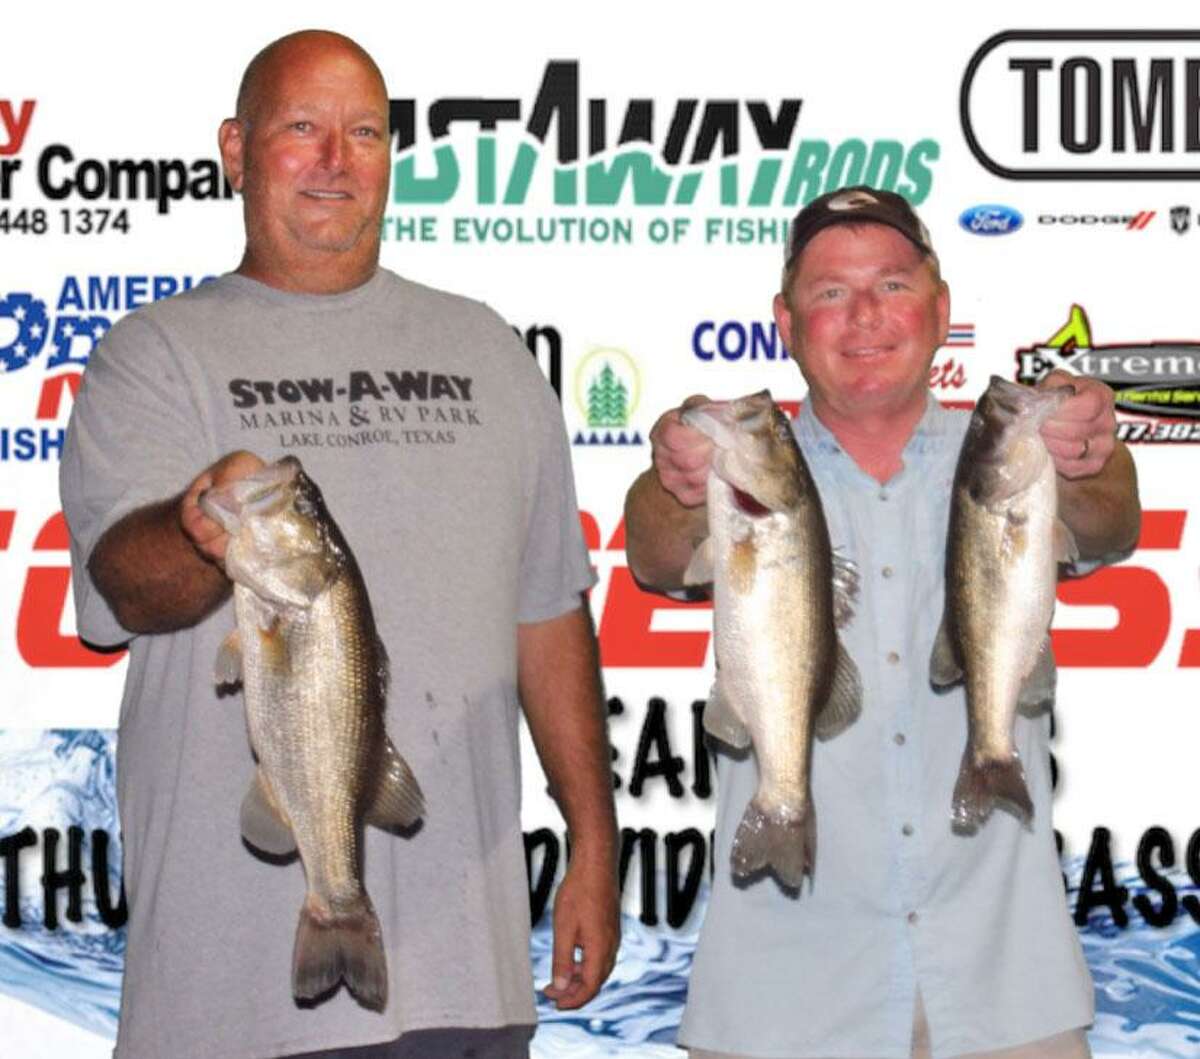 Vince Anderson and Rusty Lawson came in third place in the CONROEBASS Tuesday Tournament with a stringer total weight of 9.12 pounds.